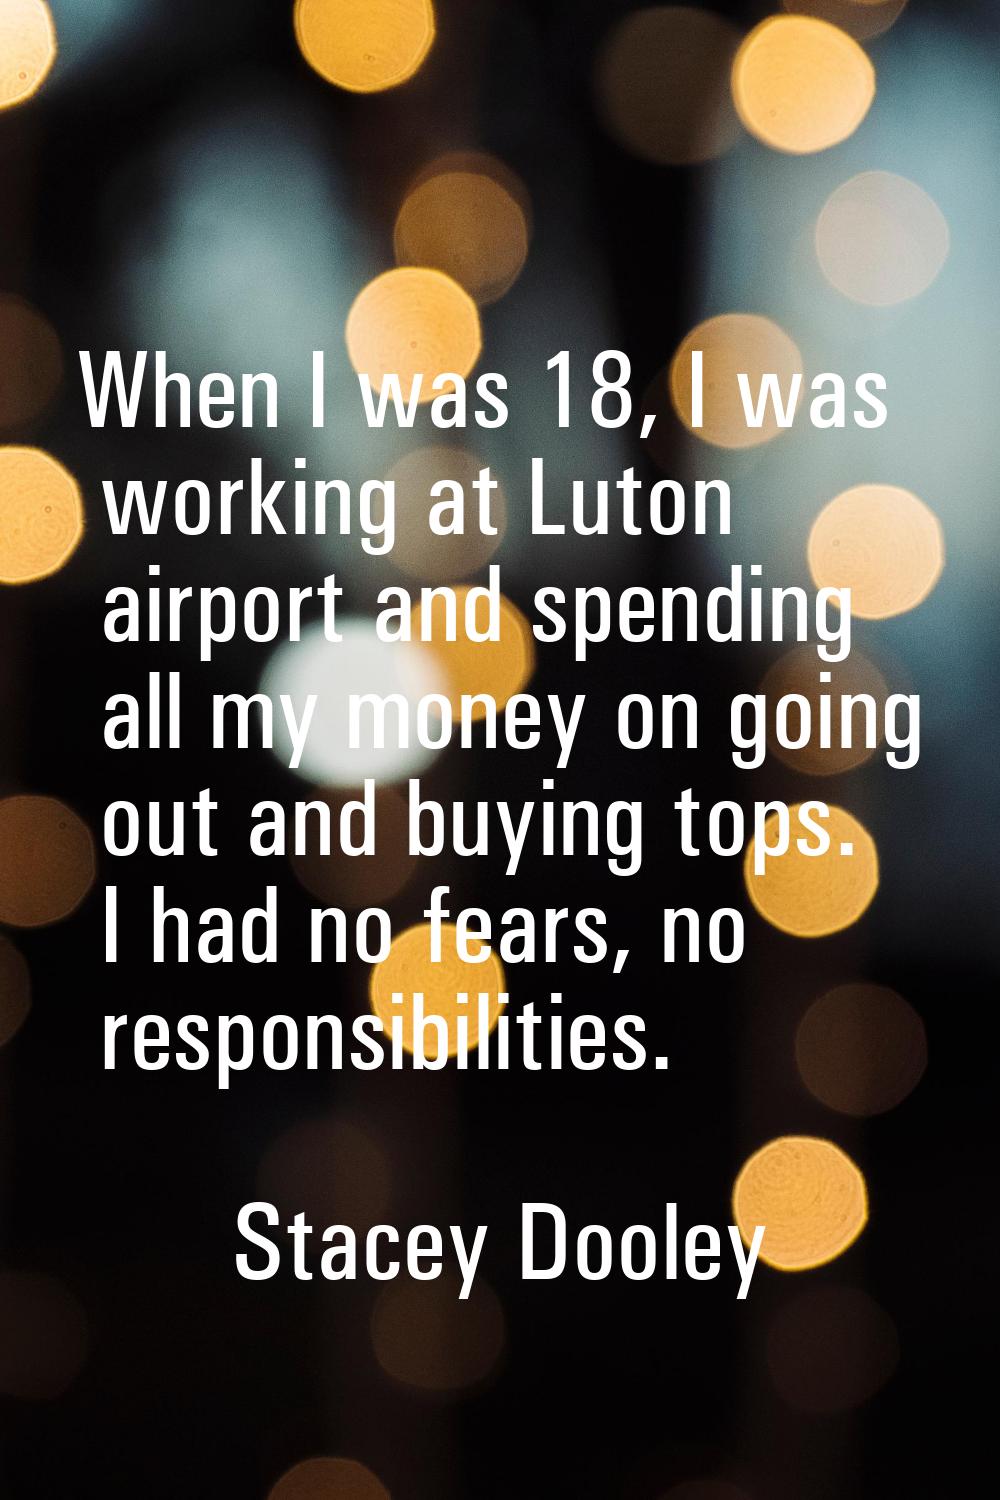 When I was 18, I was working at Luton airport and spending all my money on going out and buying top